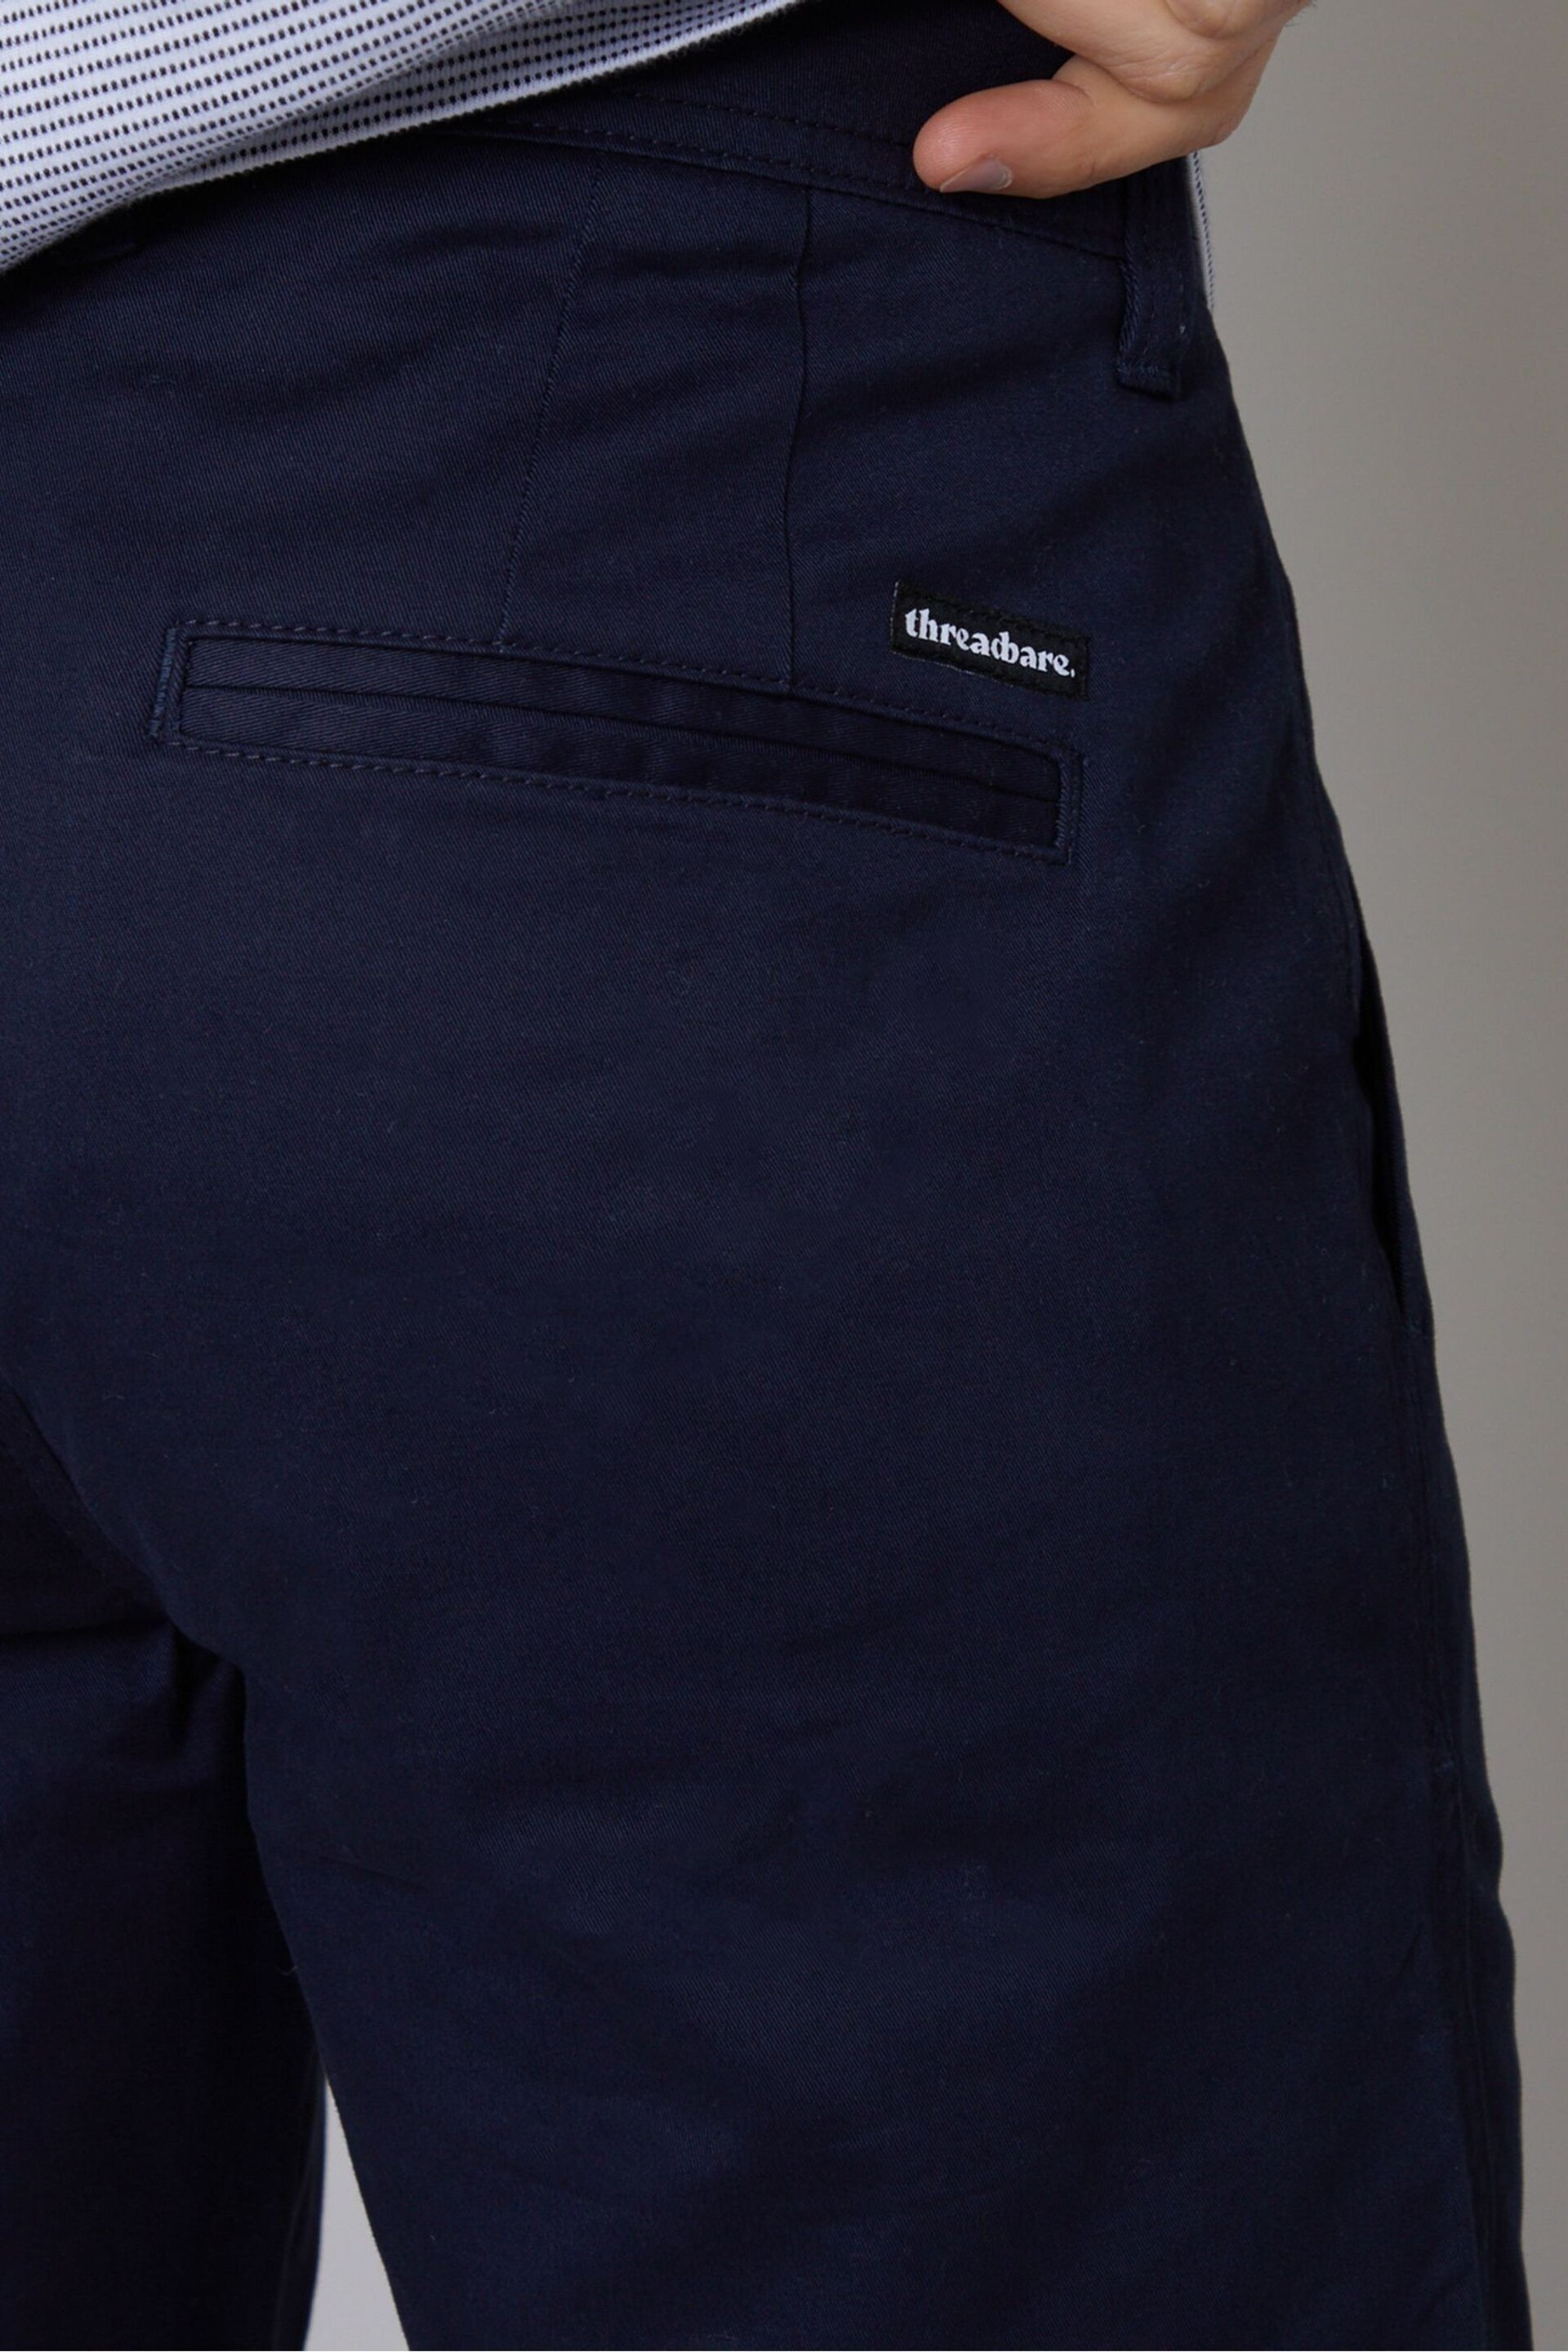 Threadbare Blue Cotton Regular Fit Chino Trousers with Stretch - Image 4 of 4